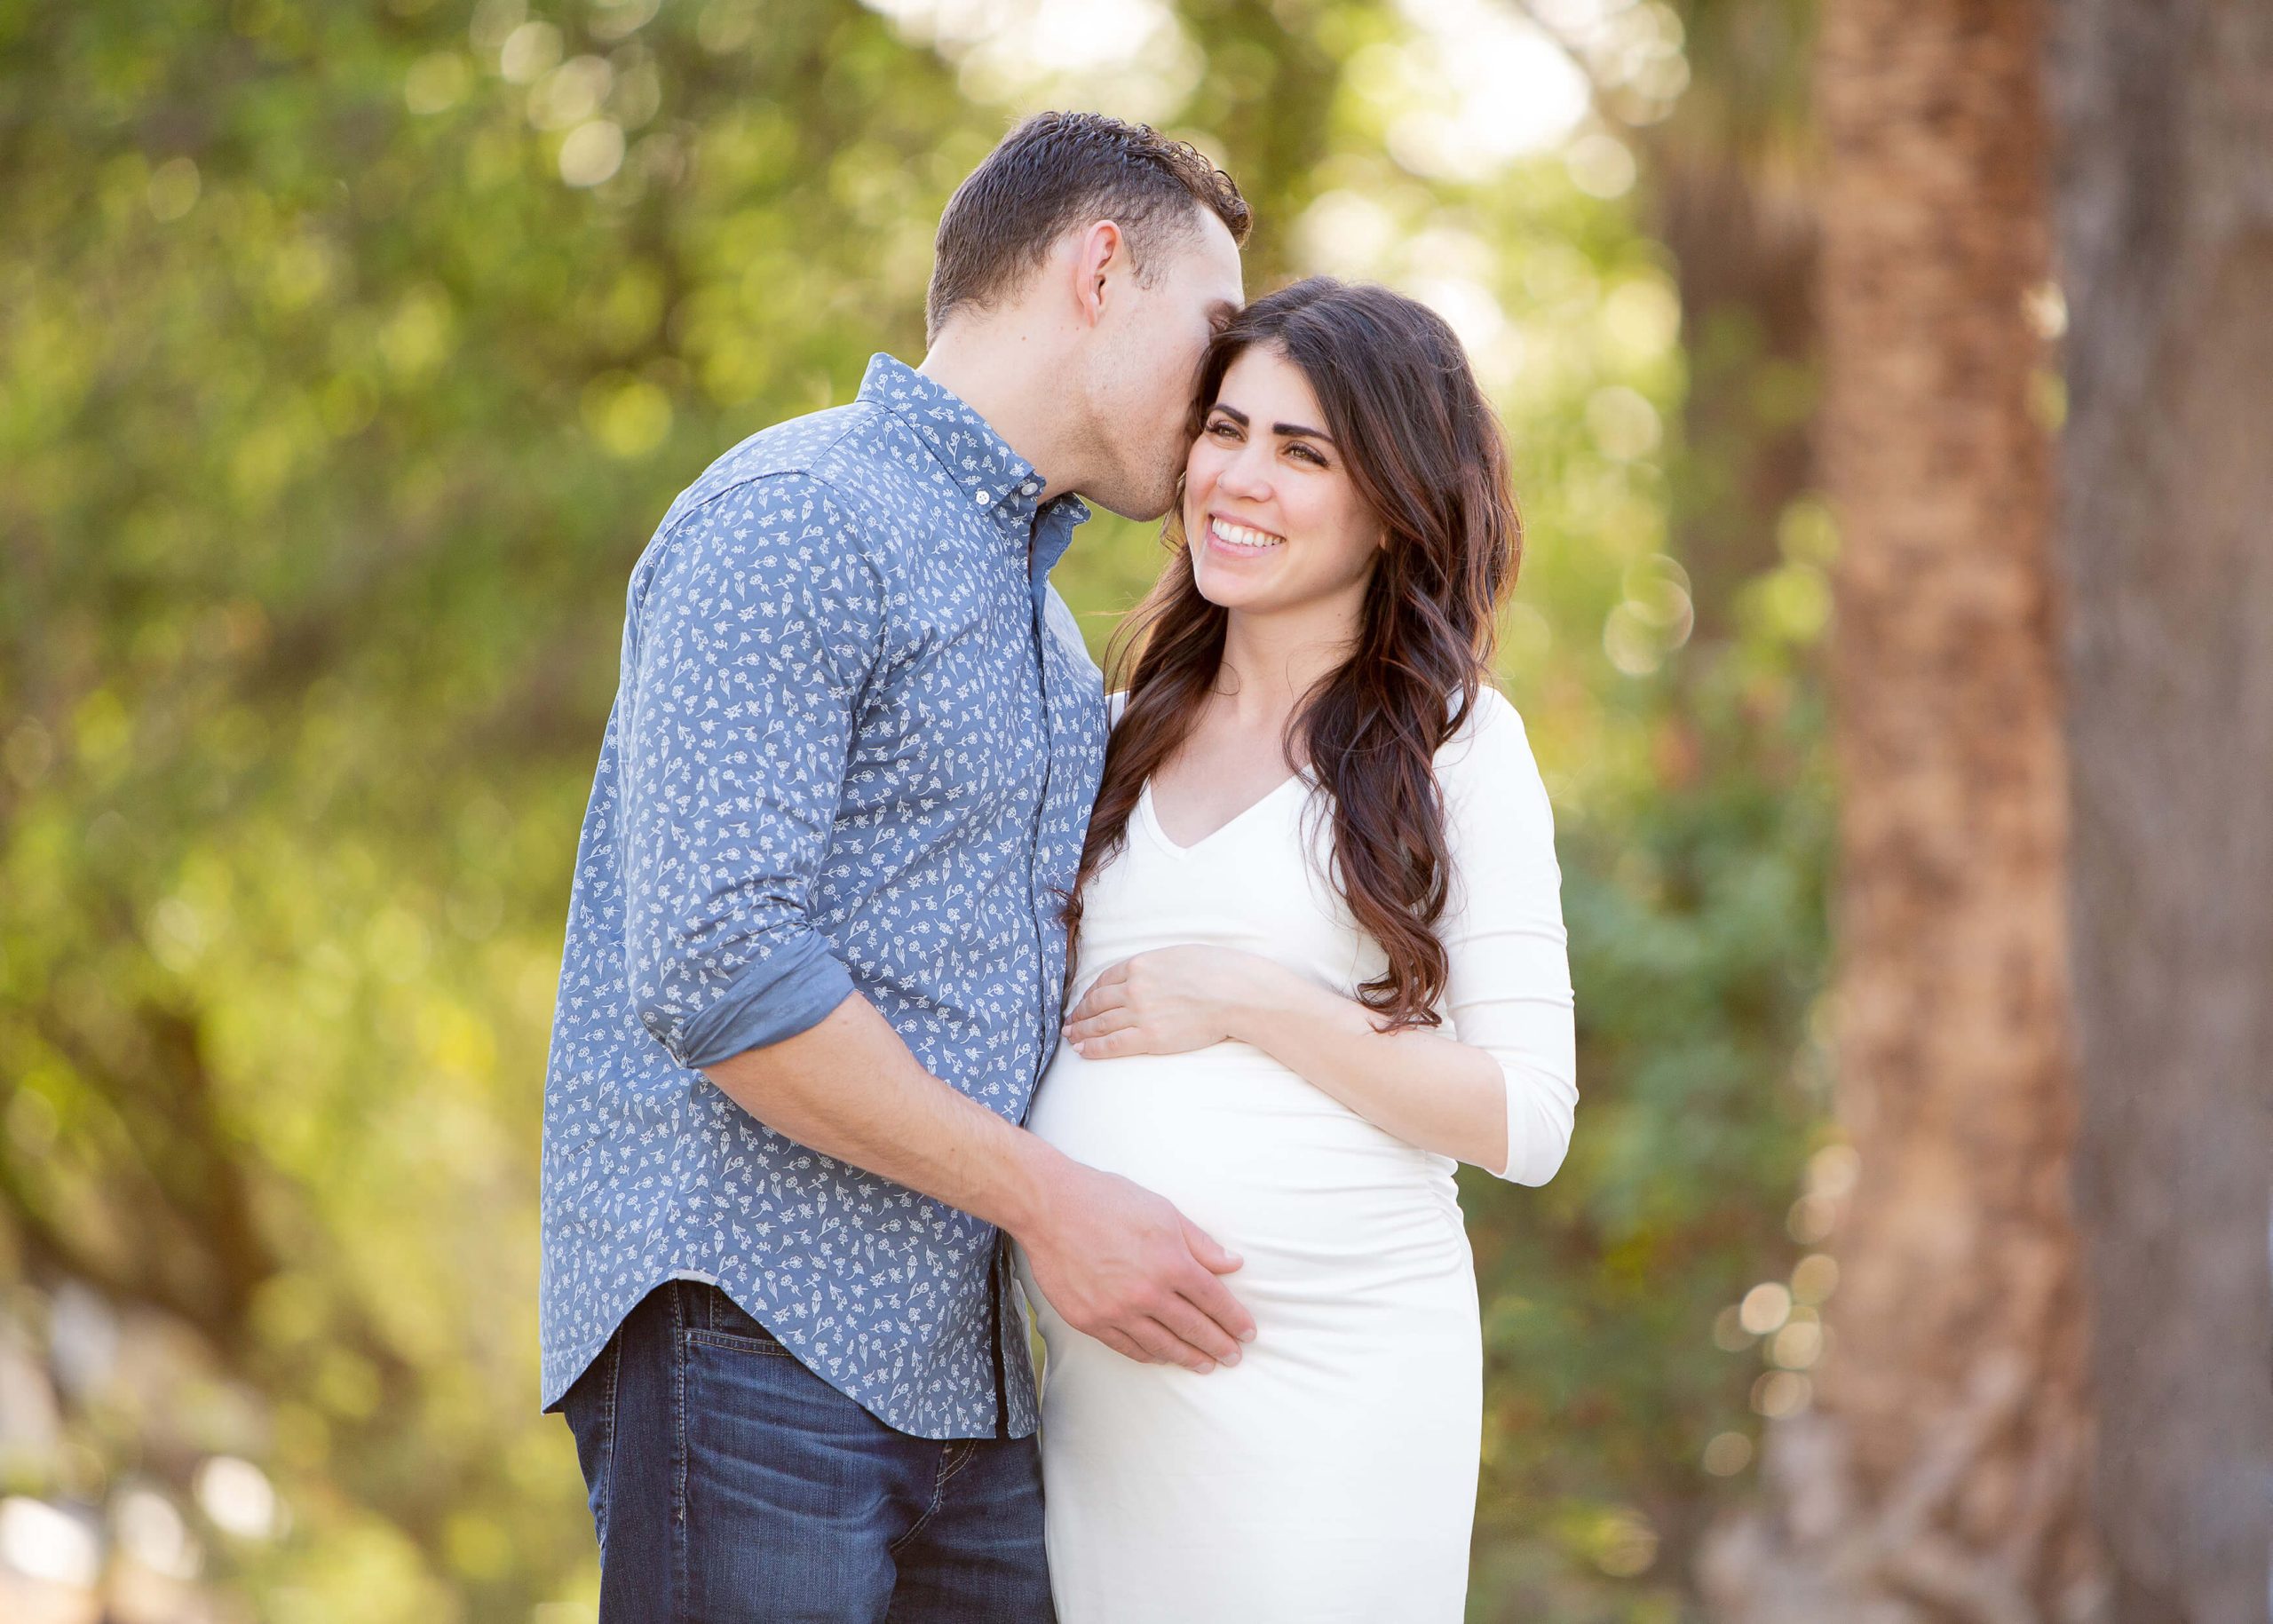 Planning the Perfect Maternity Photoshoot: What Week of Pregnancy is Best?  - Calgary's #1 Newborn, Maternity, Cake Smash, and Family Photographer |  Amanda Dams Photography